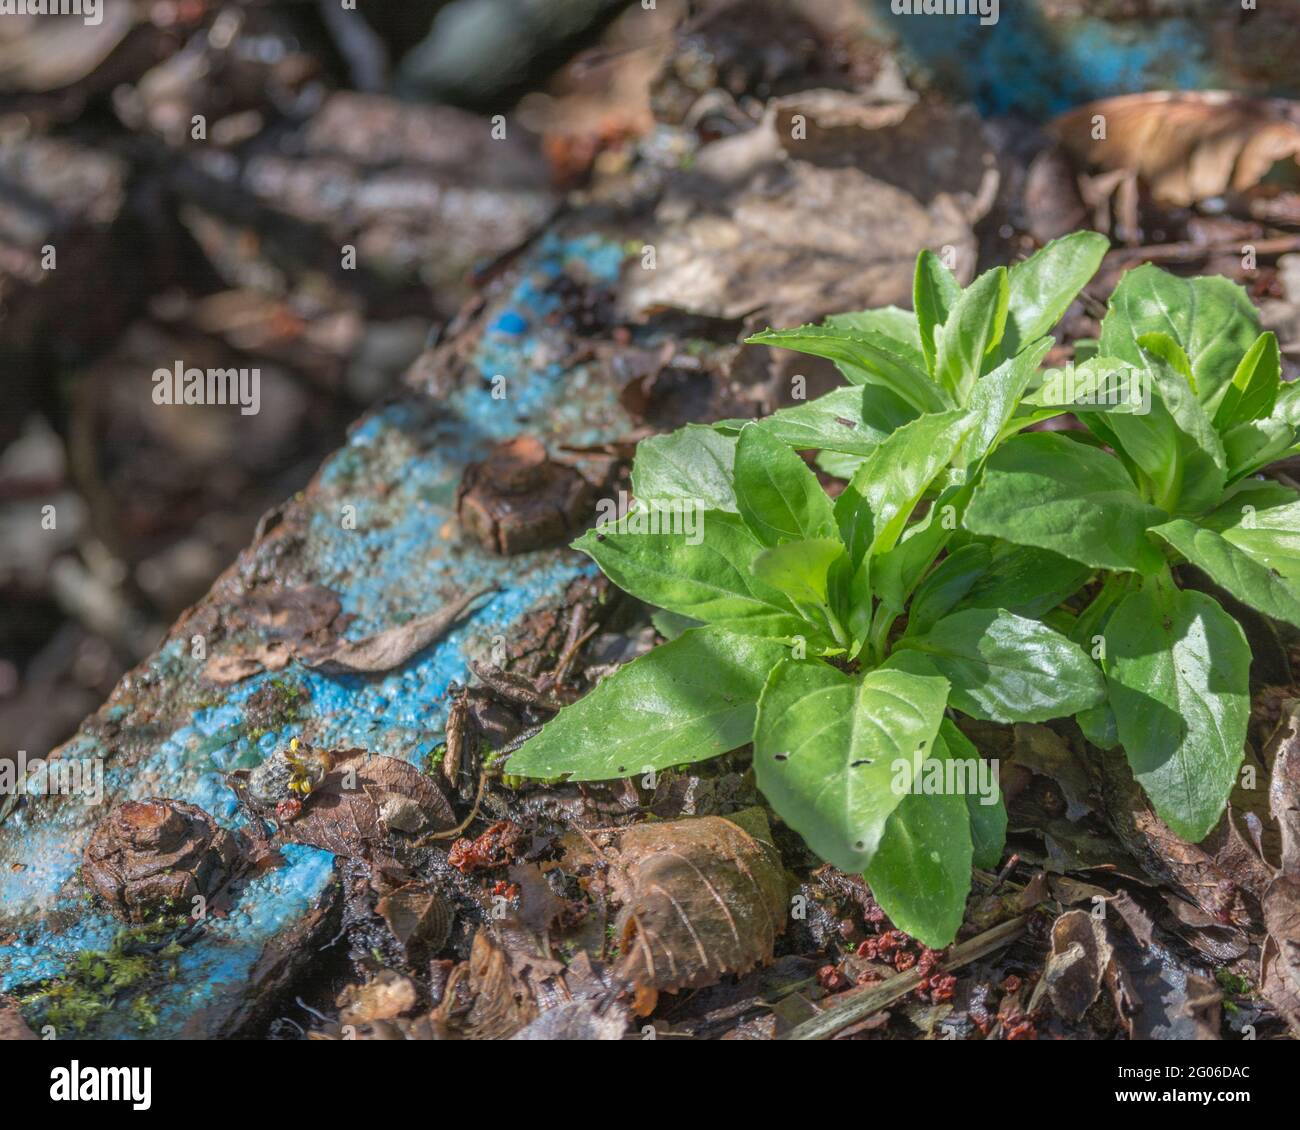 Early Spring leaves of weed growing in ccracks of an abandoned farm trailer. Possibly an Epilobium of Willowherb family / Onagraceae.  Weeds growing. Stock Photo